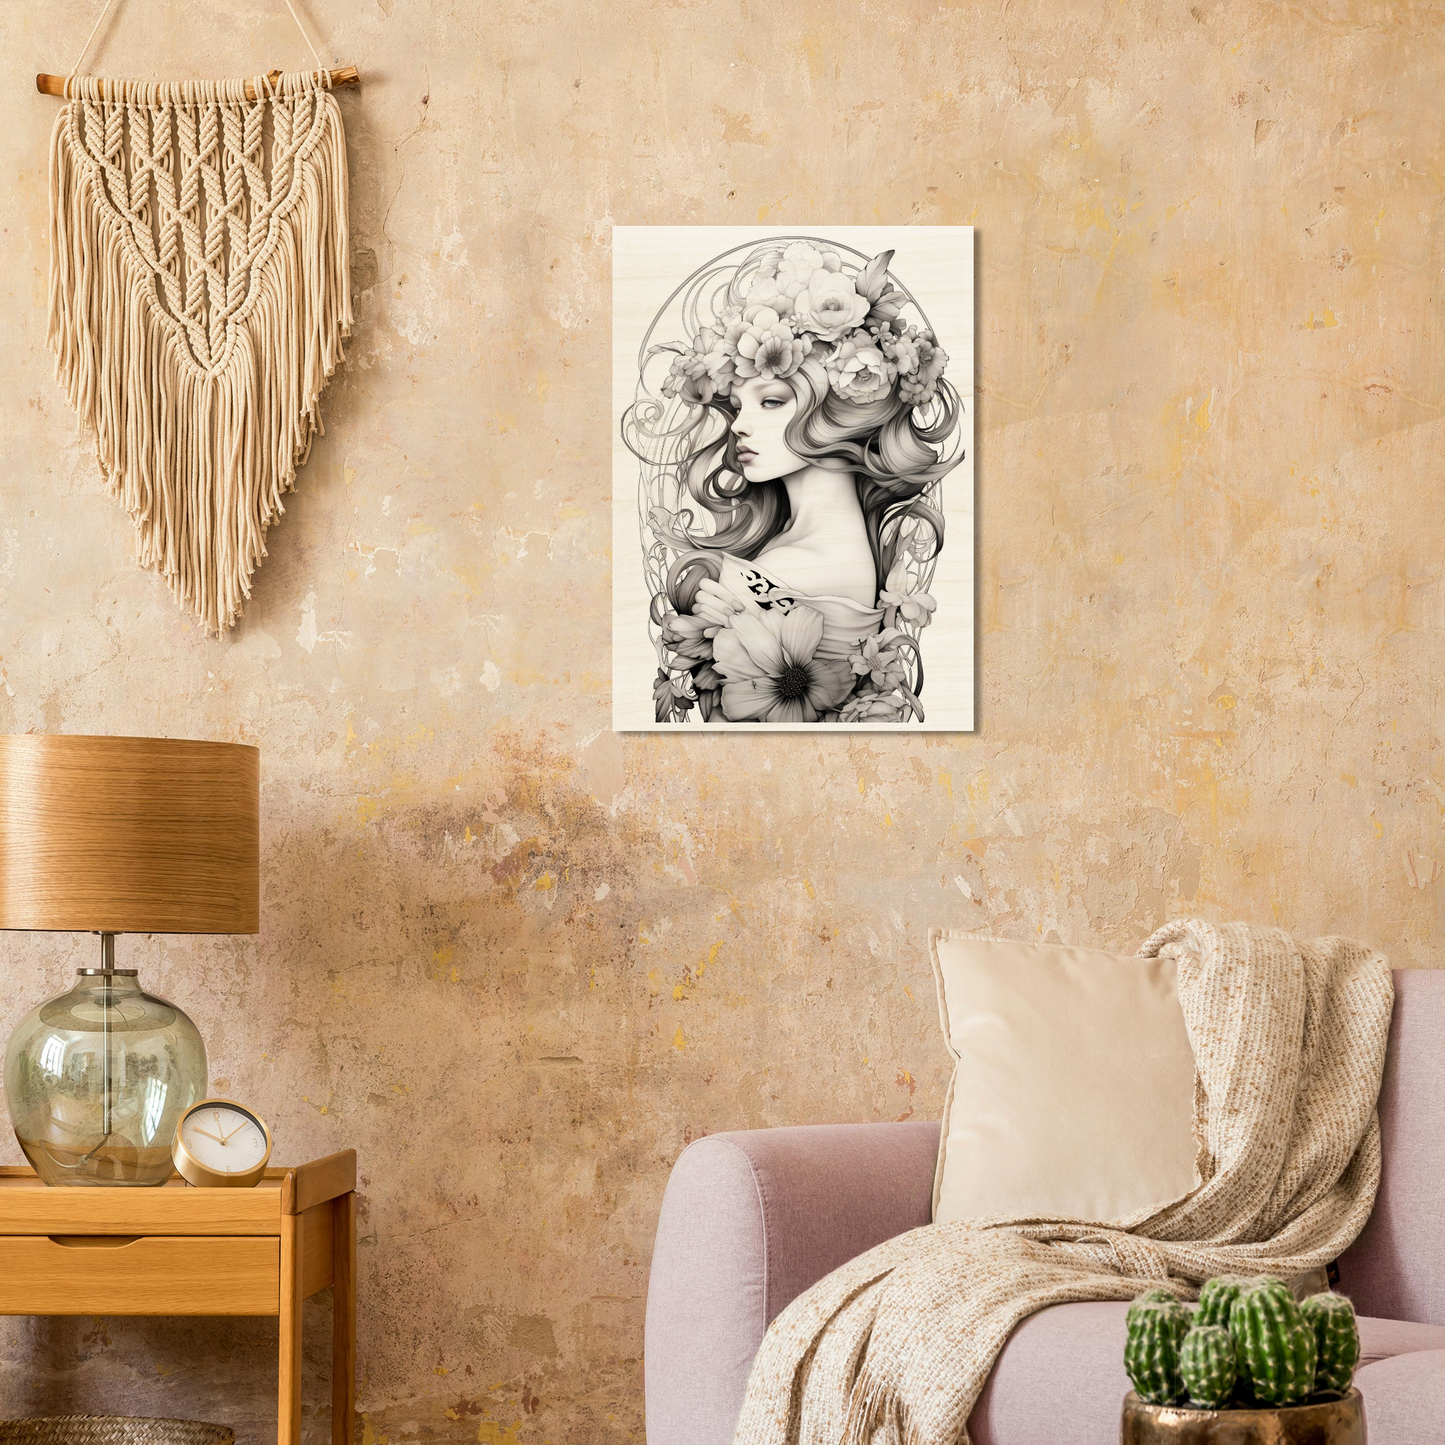 A black and white drawing of a woman with flowers in her hair, perfect for an Art Deco Flower Head Monochrome - Wood Prints wall art poster.